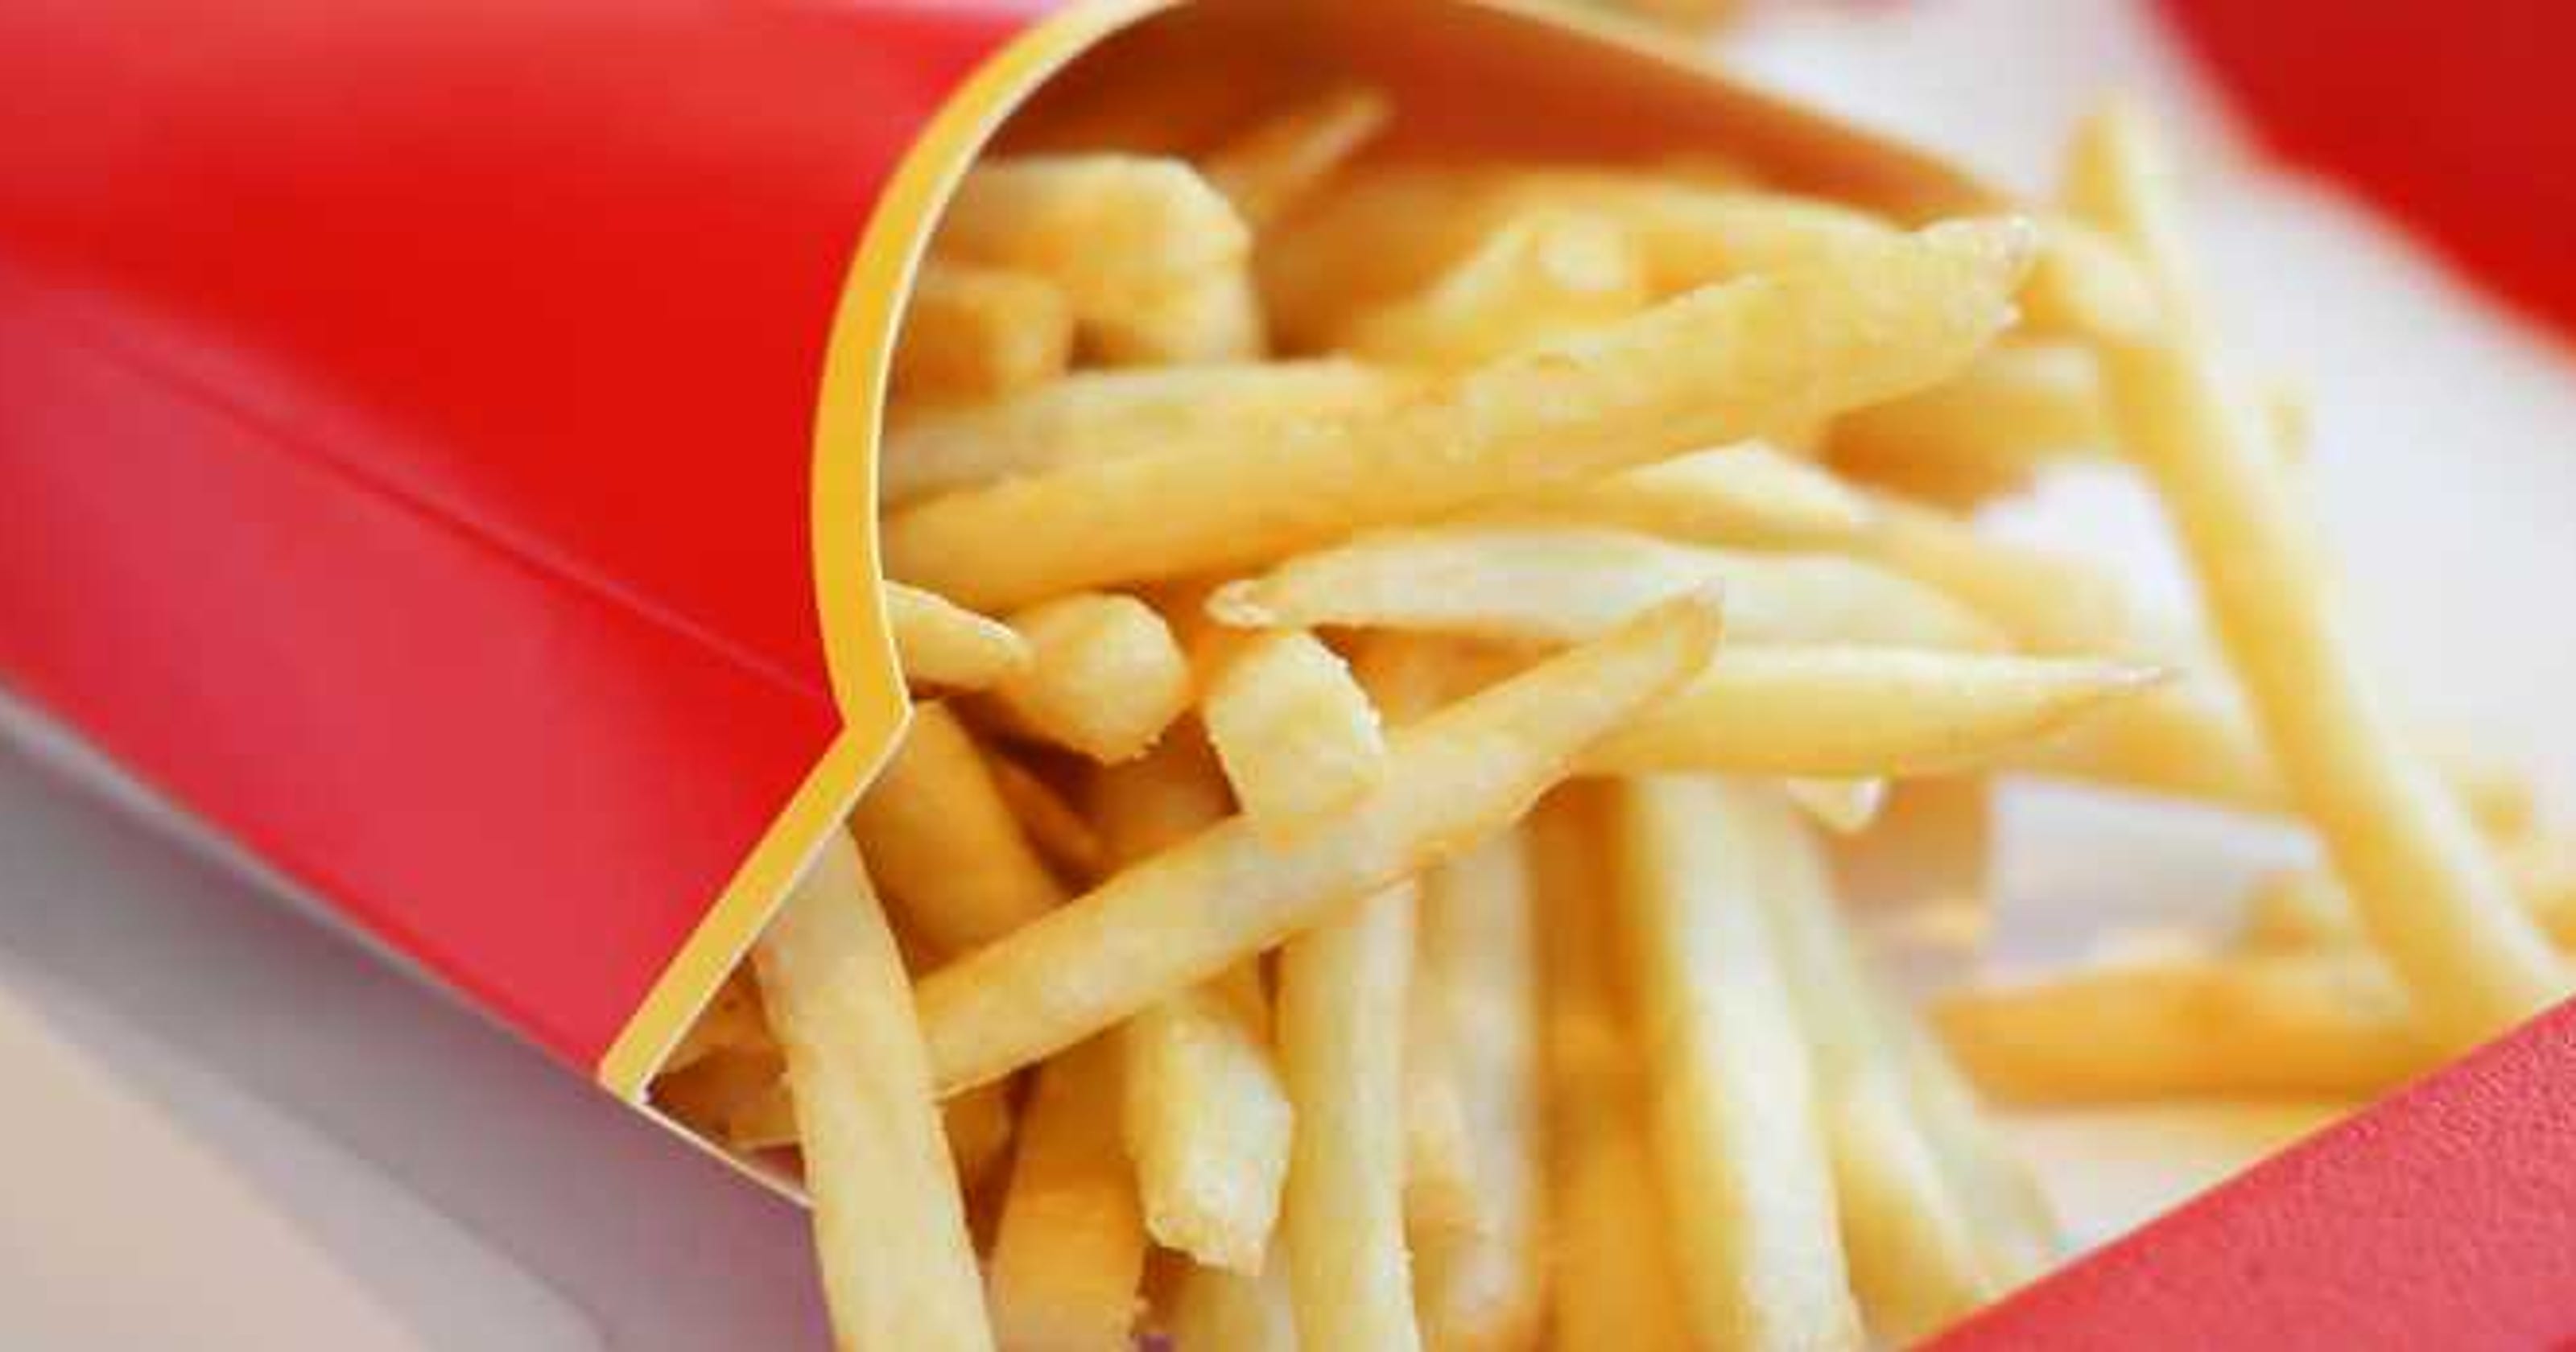 national-french-fry-day-2018-freebies-deals-to-dip-july-13